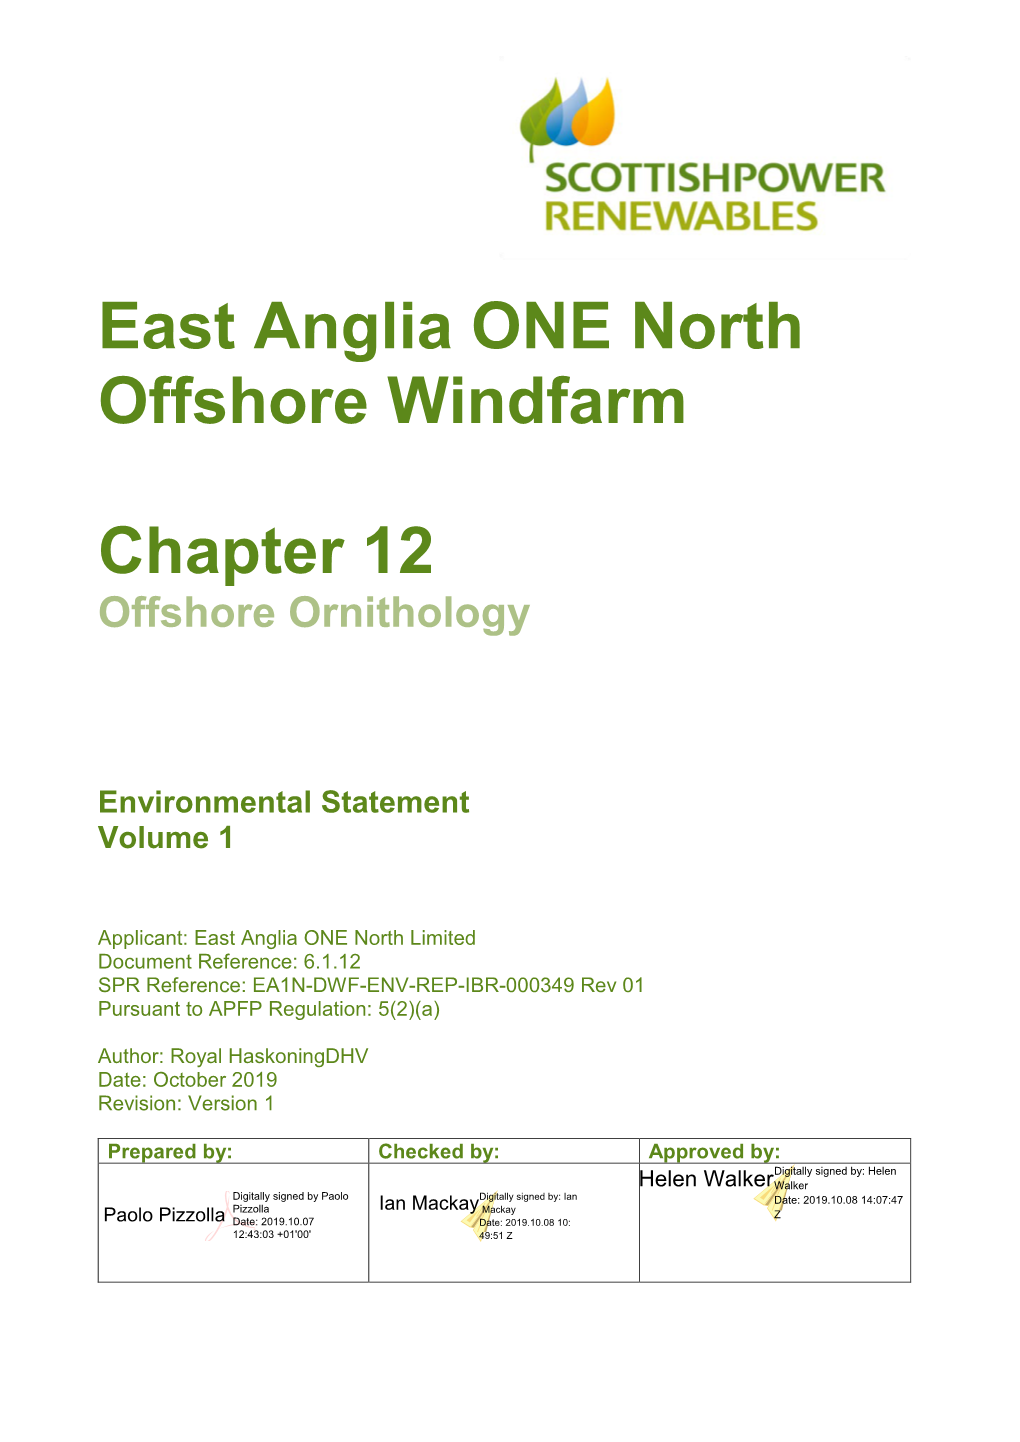 East Anglia ONE North Offshore Windfarm Chapter 12